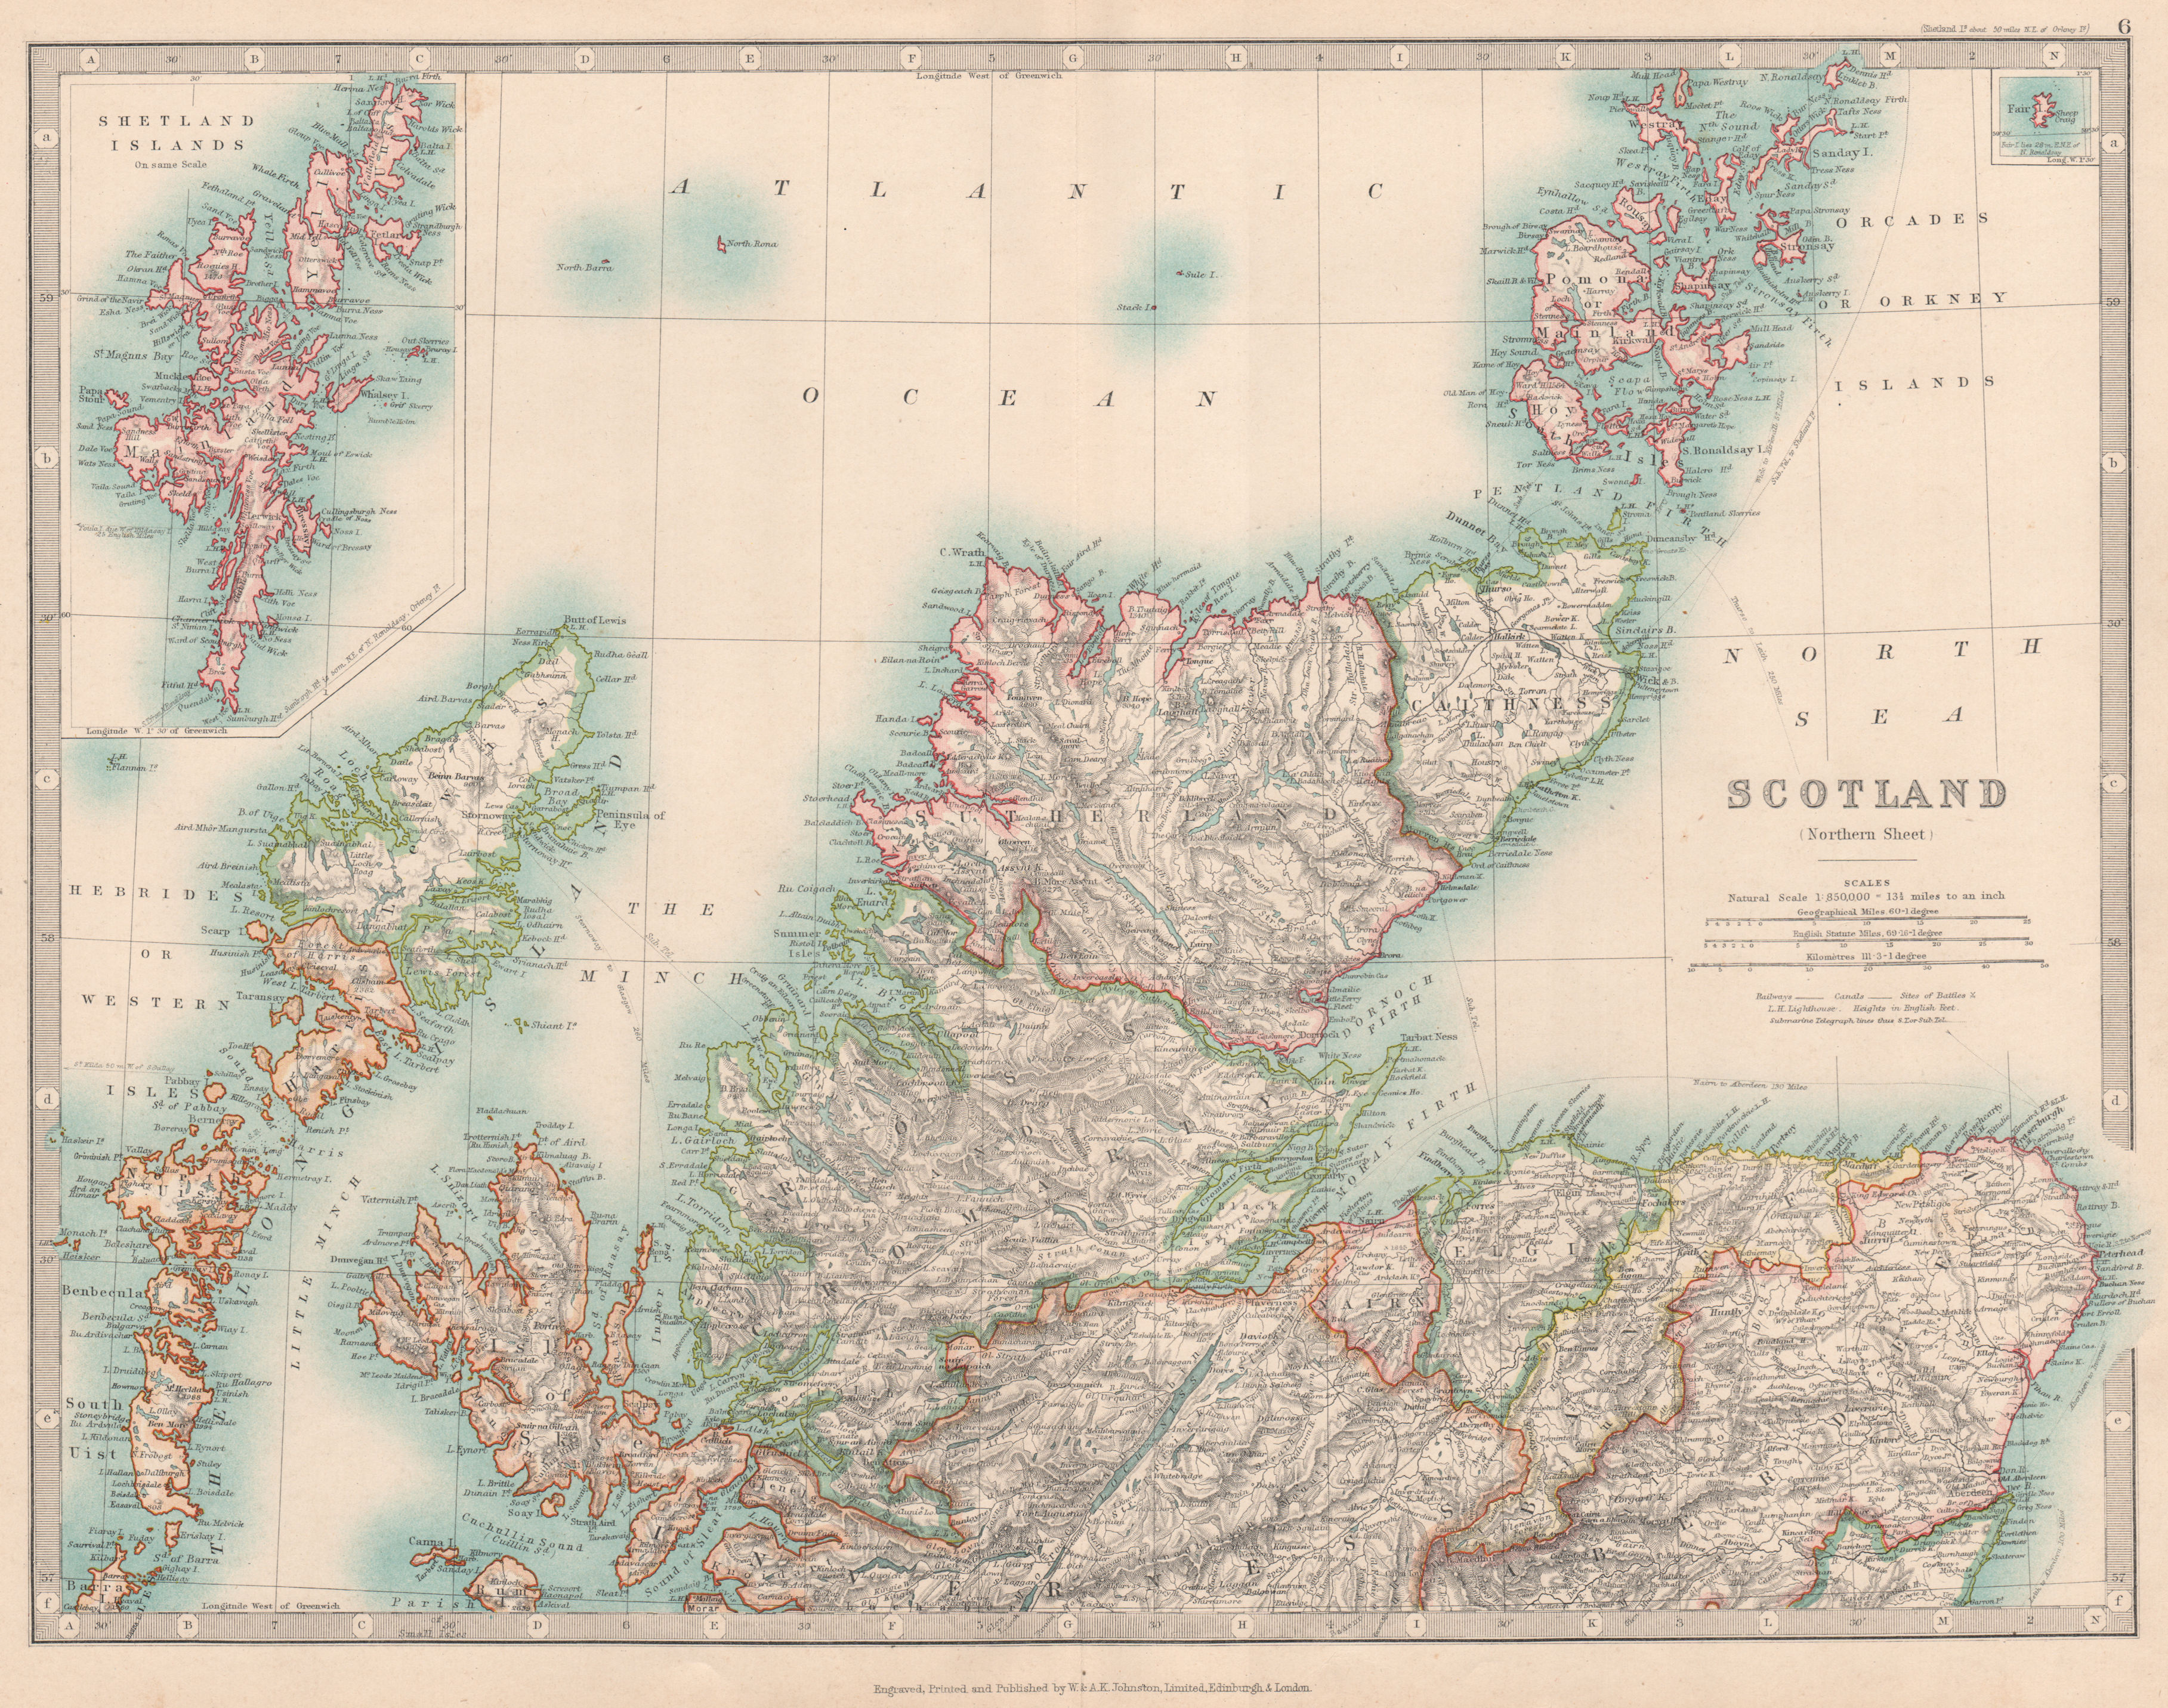 Associate Product NORTHERN SCOTLAND showing battlefields and dates. JOHNSTON 1912 old map